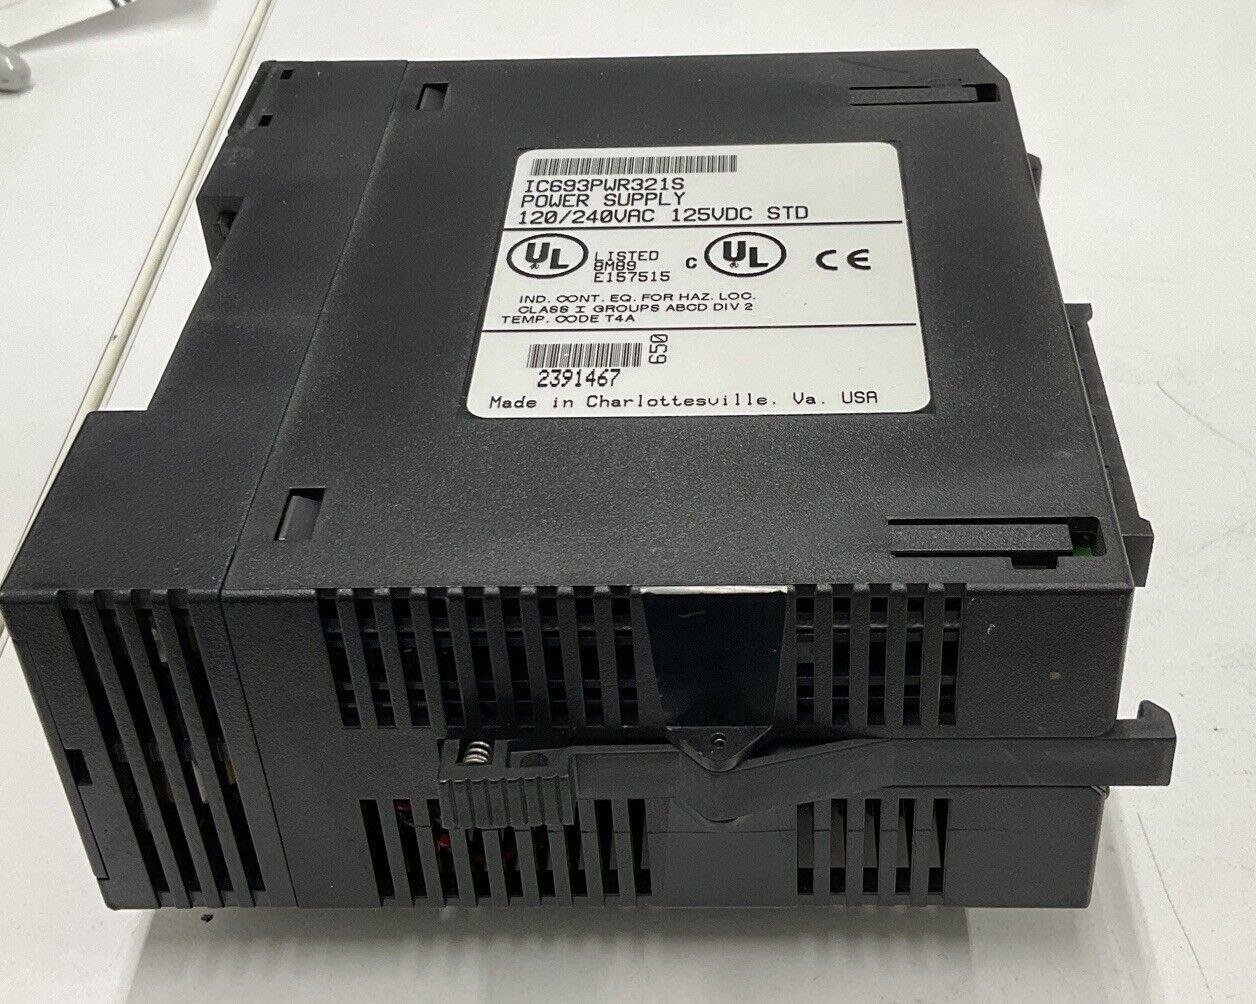 GE Fanuc IC693PWR321S Power Supply Series 90-30, 0.8A (BL115)